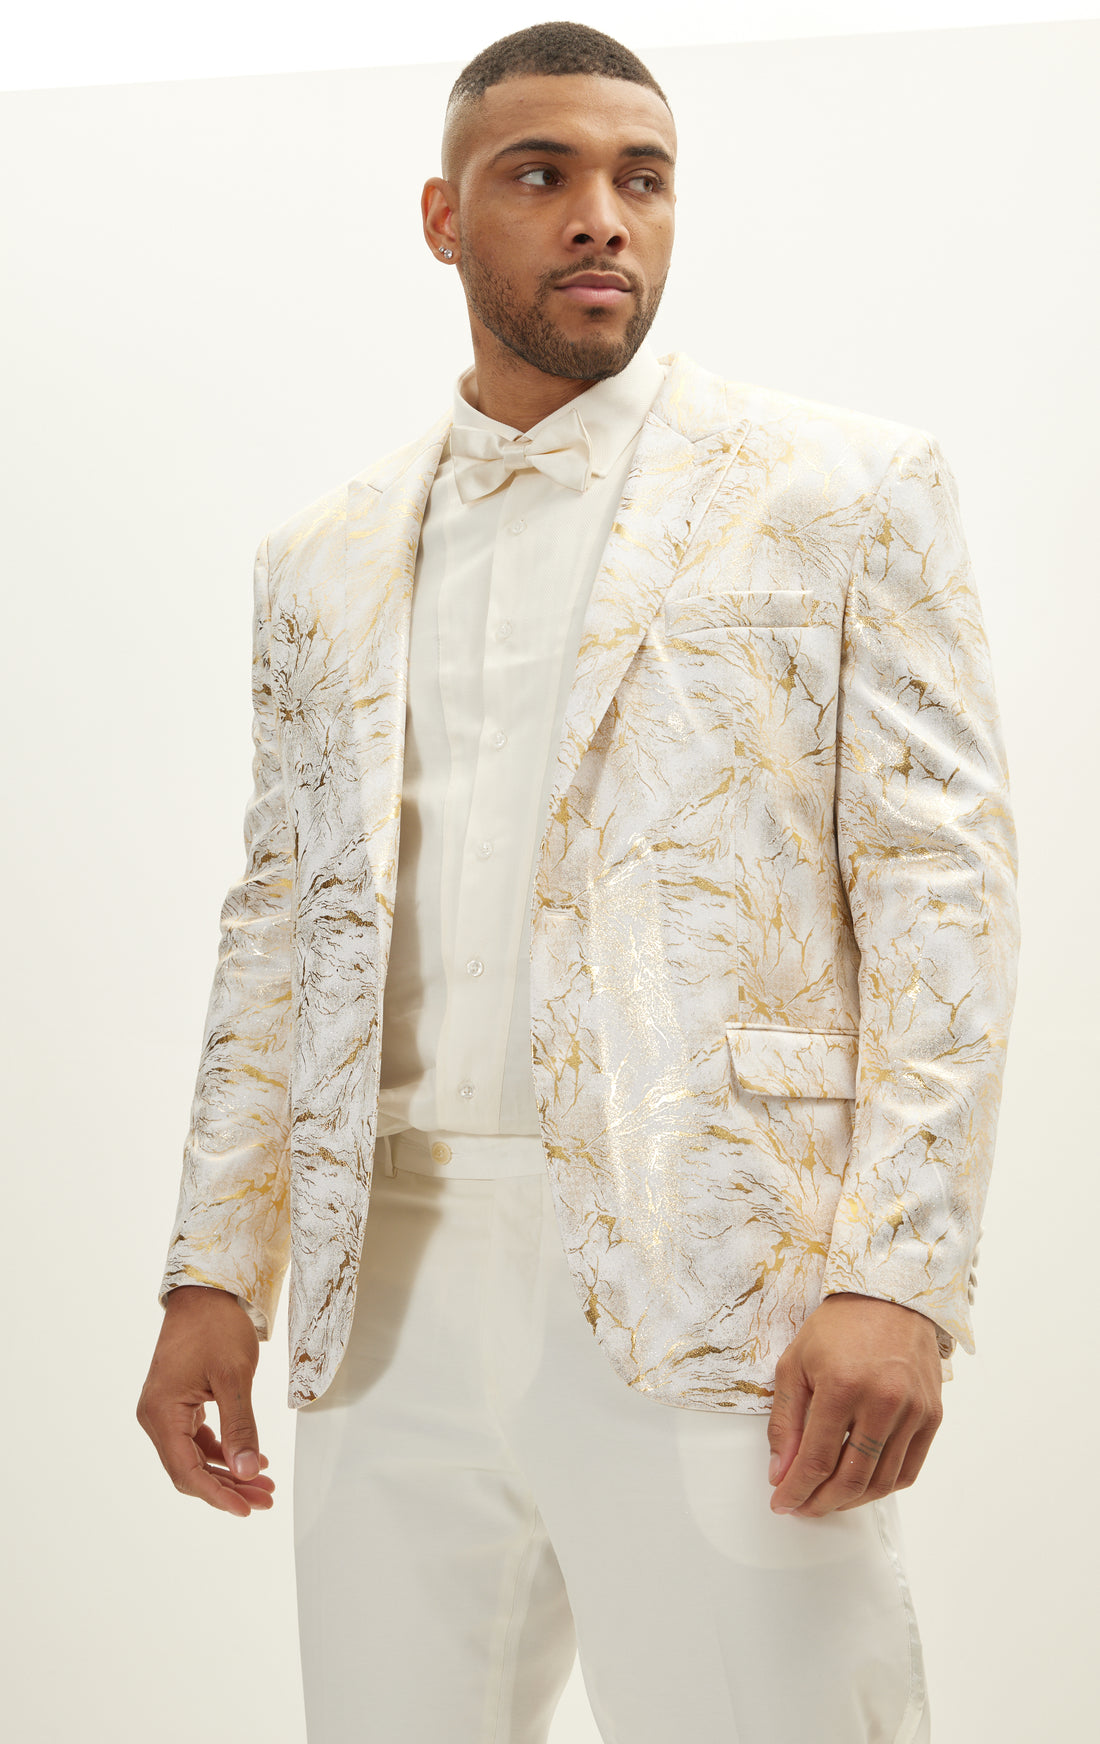 The Wet Look Electric Tuxedo Jacket - White Gold